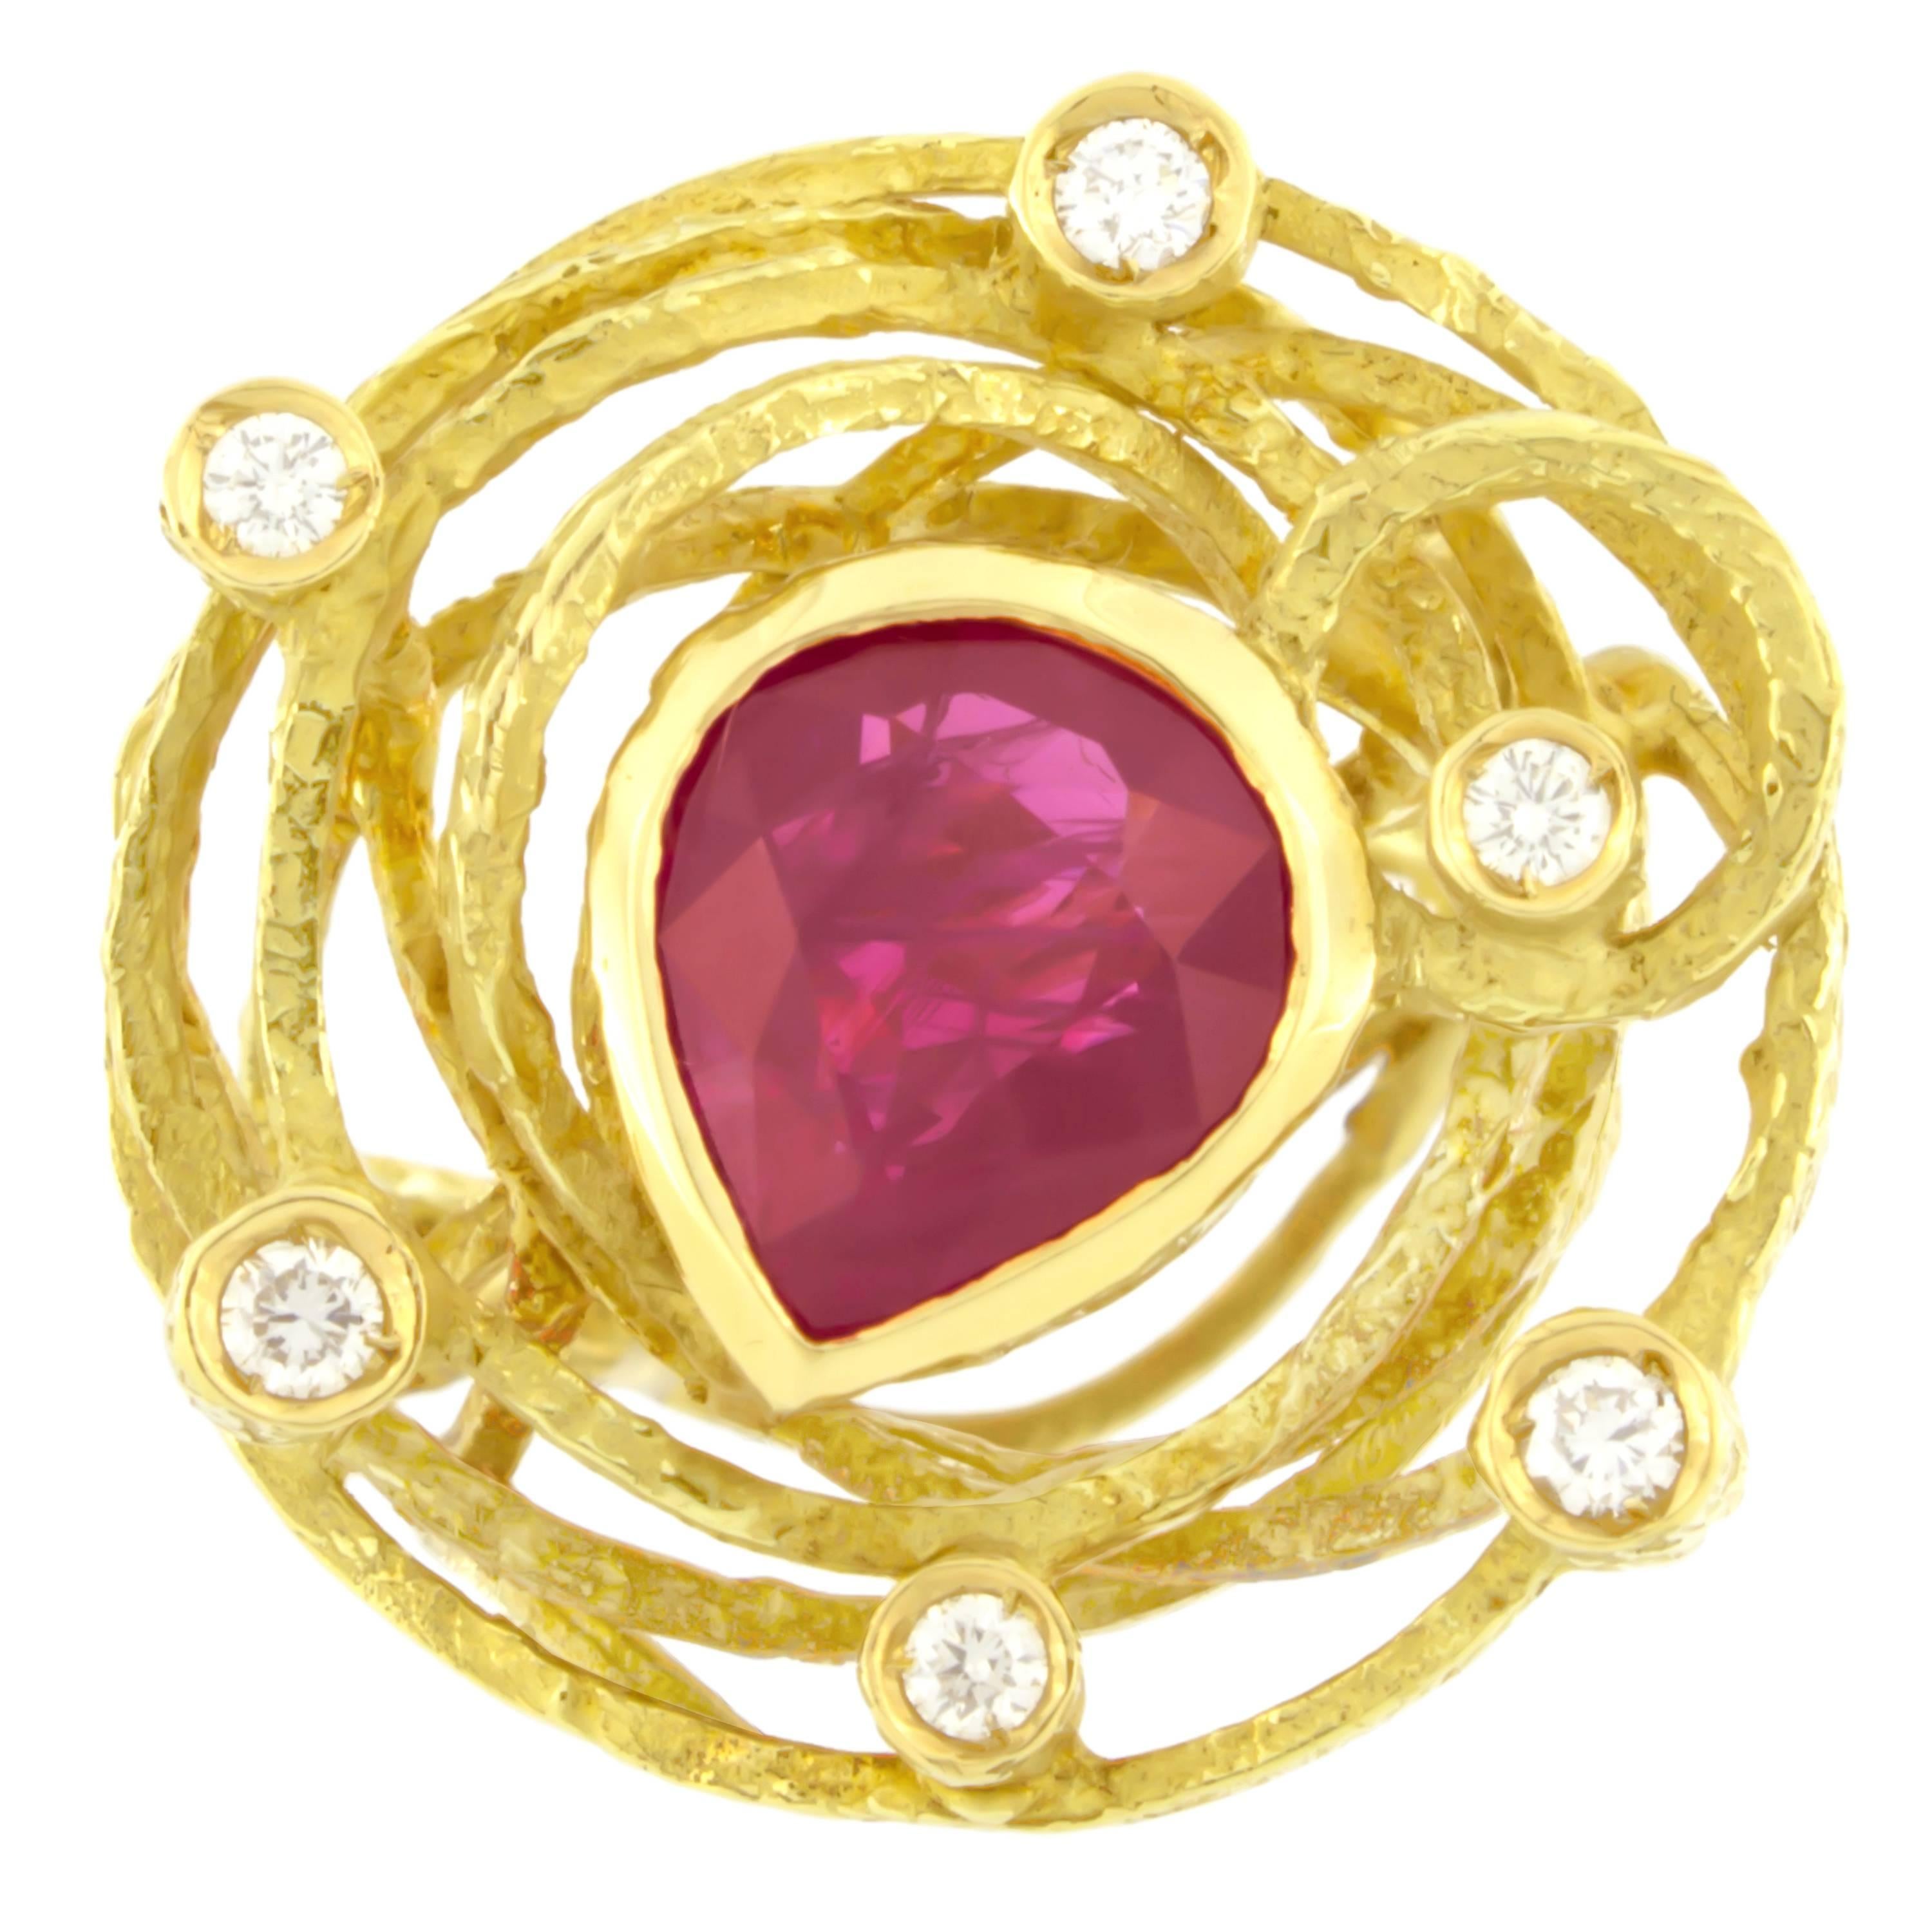 Gorgeous Pear cut Ruby and Diamonds Satin Yellow Gold Cocktail Ring, from Sacchi’s 